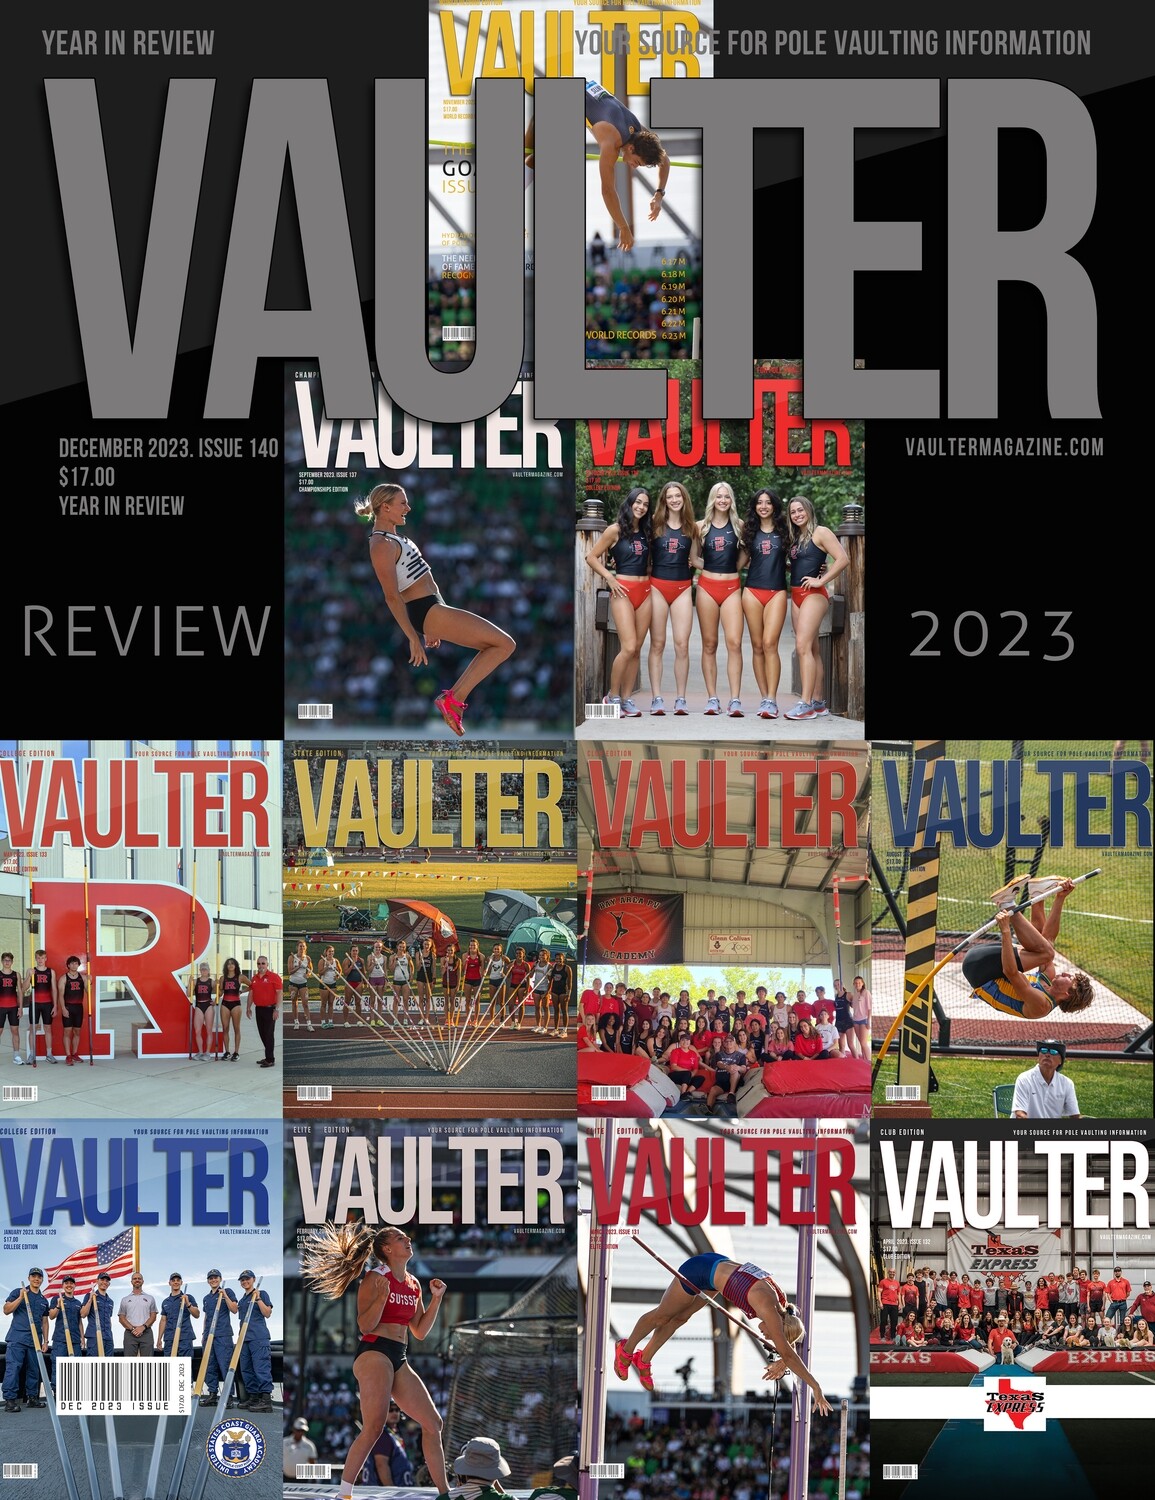 December 2023 year in review Issue of Vaulter Magazine - Digital Download